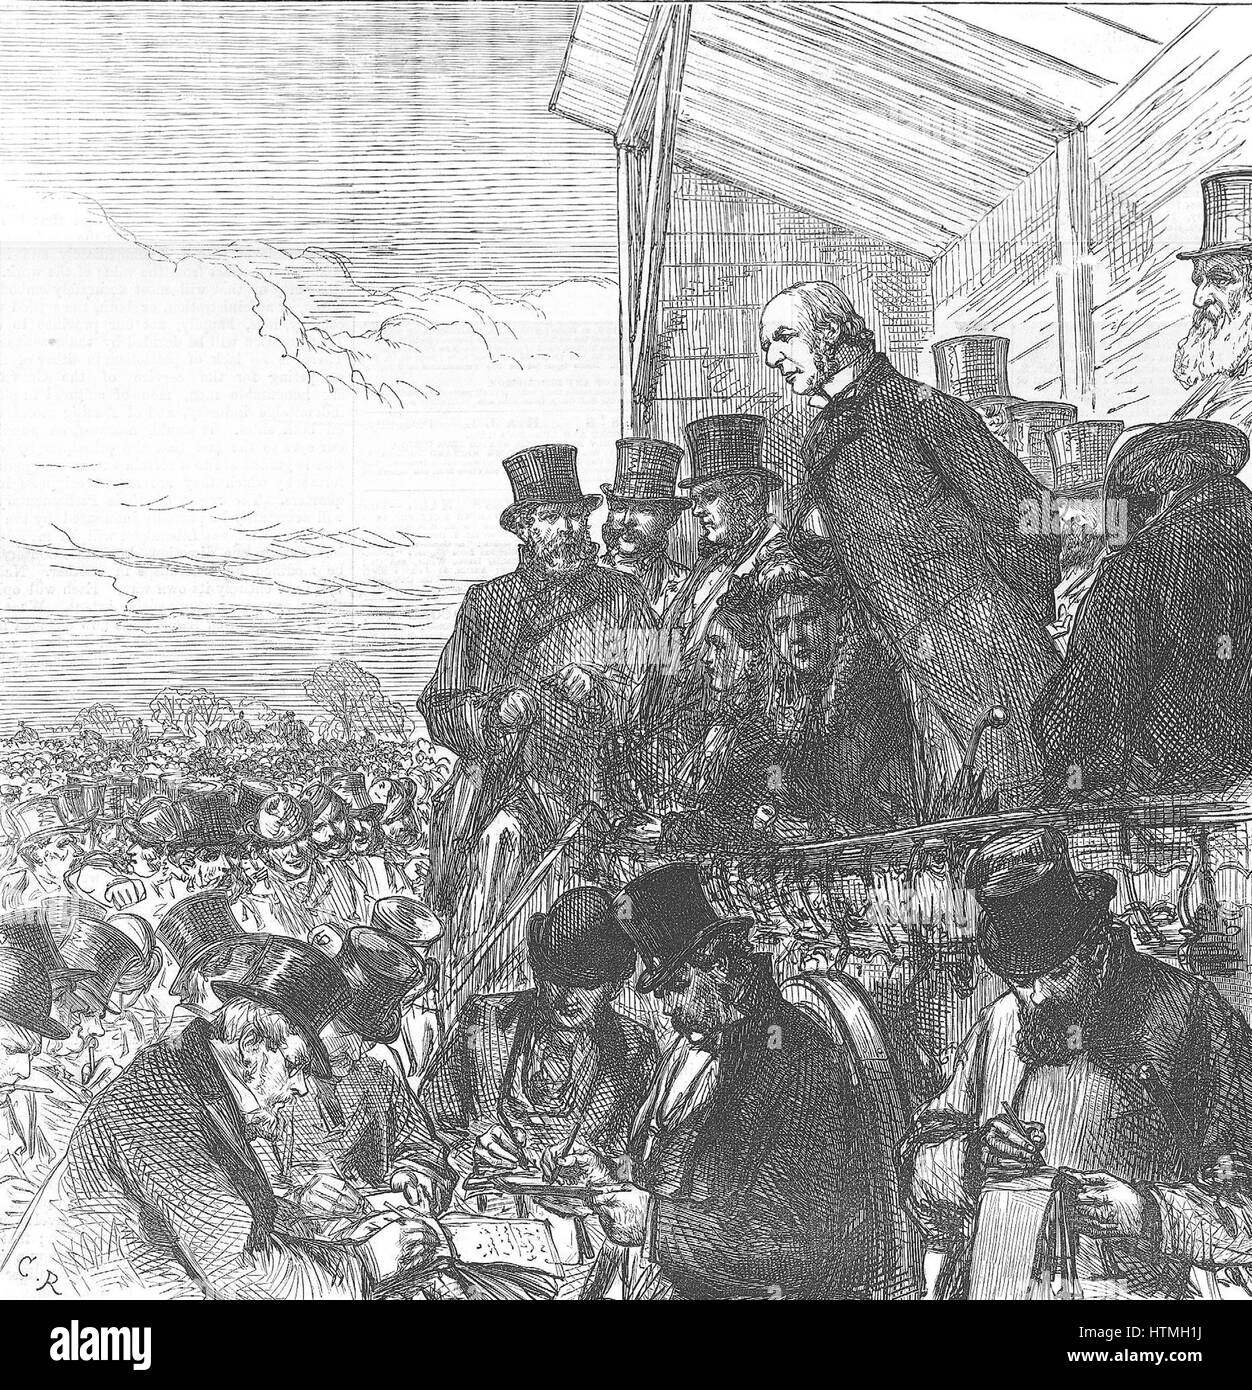 William Ewart Gladstone (1809-1898) giving an election address on Blackheath in his Greenwich constituency. General election February 1874. Gladstone lost to the Conservatives under Disraeli. From 'The Illustrated London News' 7 February 1874. Stock Photo